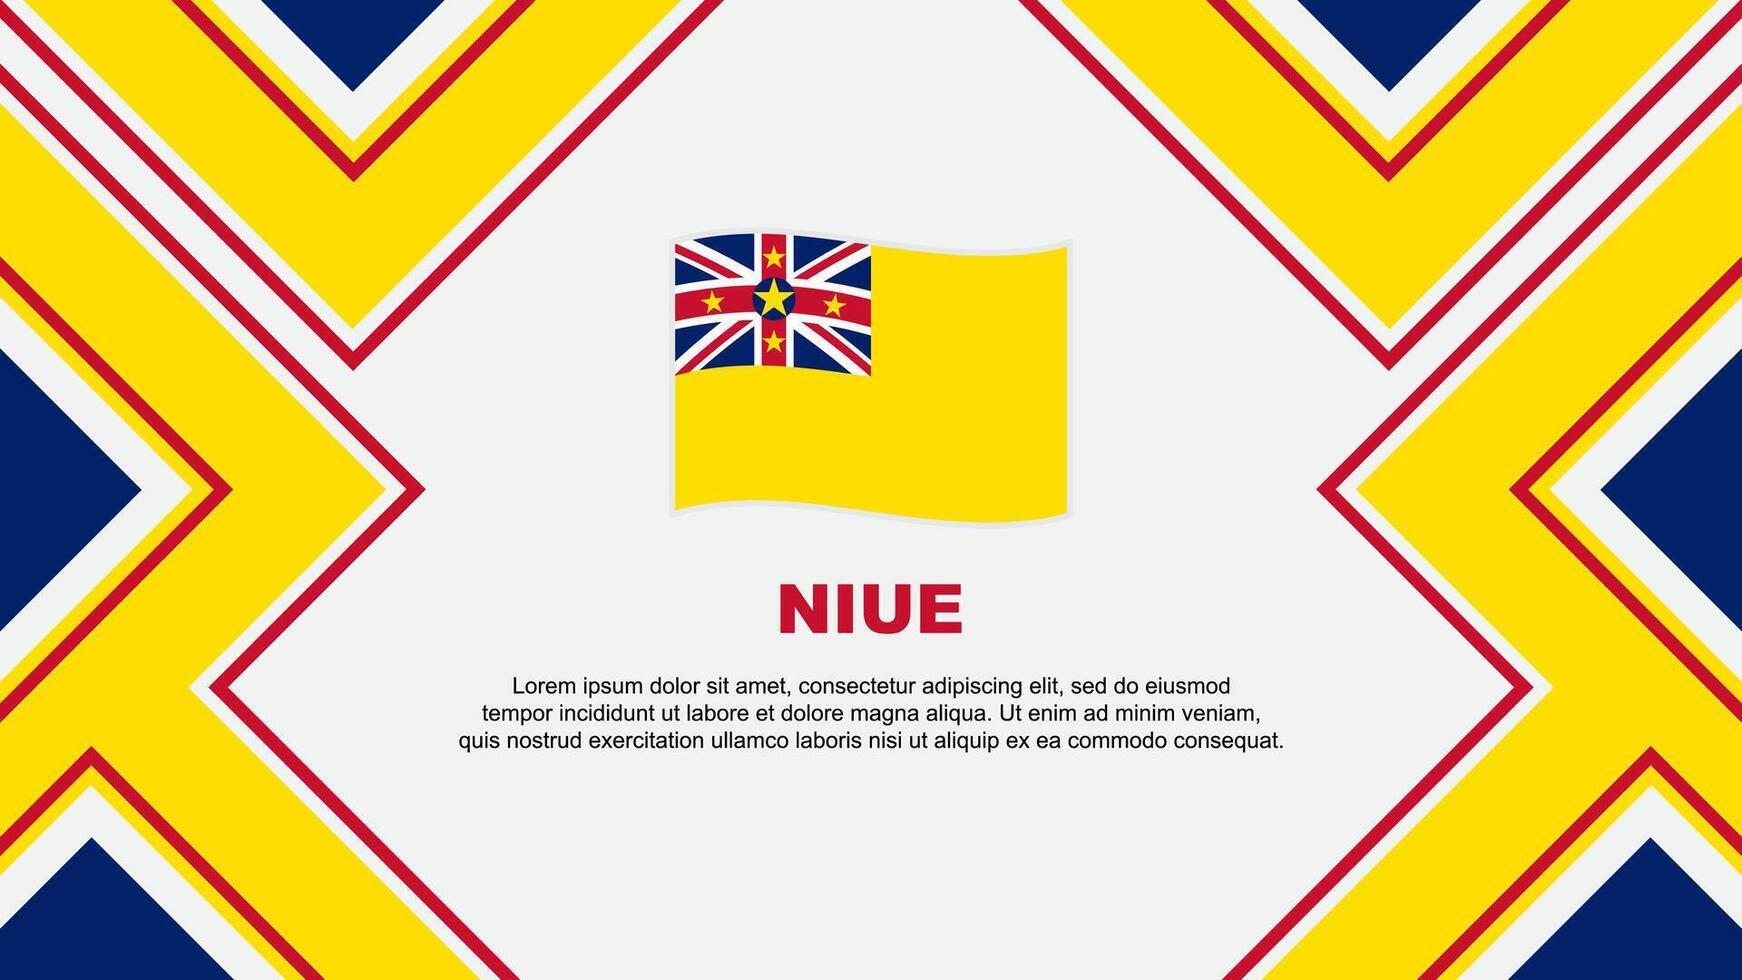 Niue Flag Abstract Background Design Template. Niue Independence Day Banner Wallpaper Vector Illustration. Niue Vector